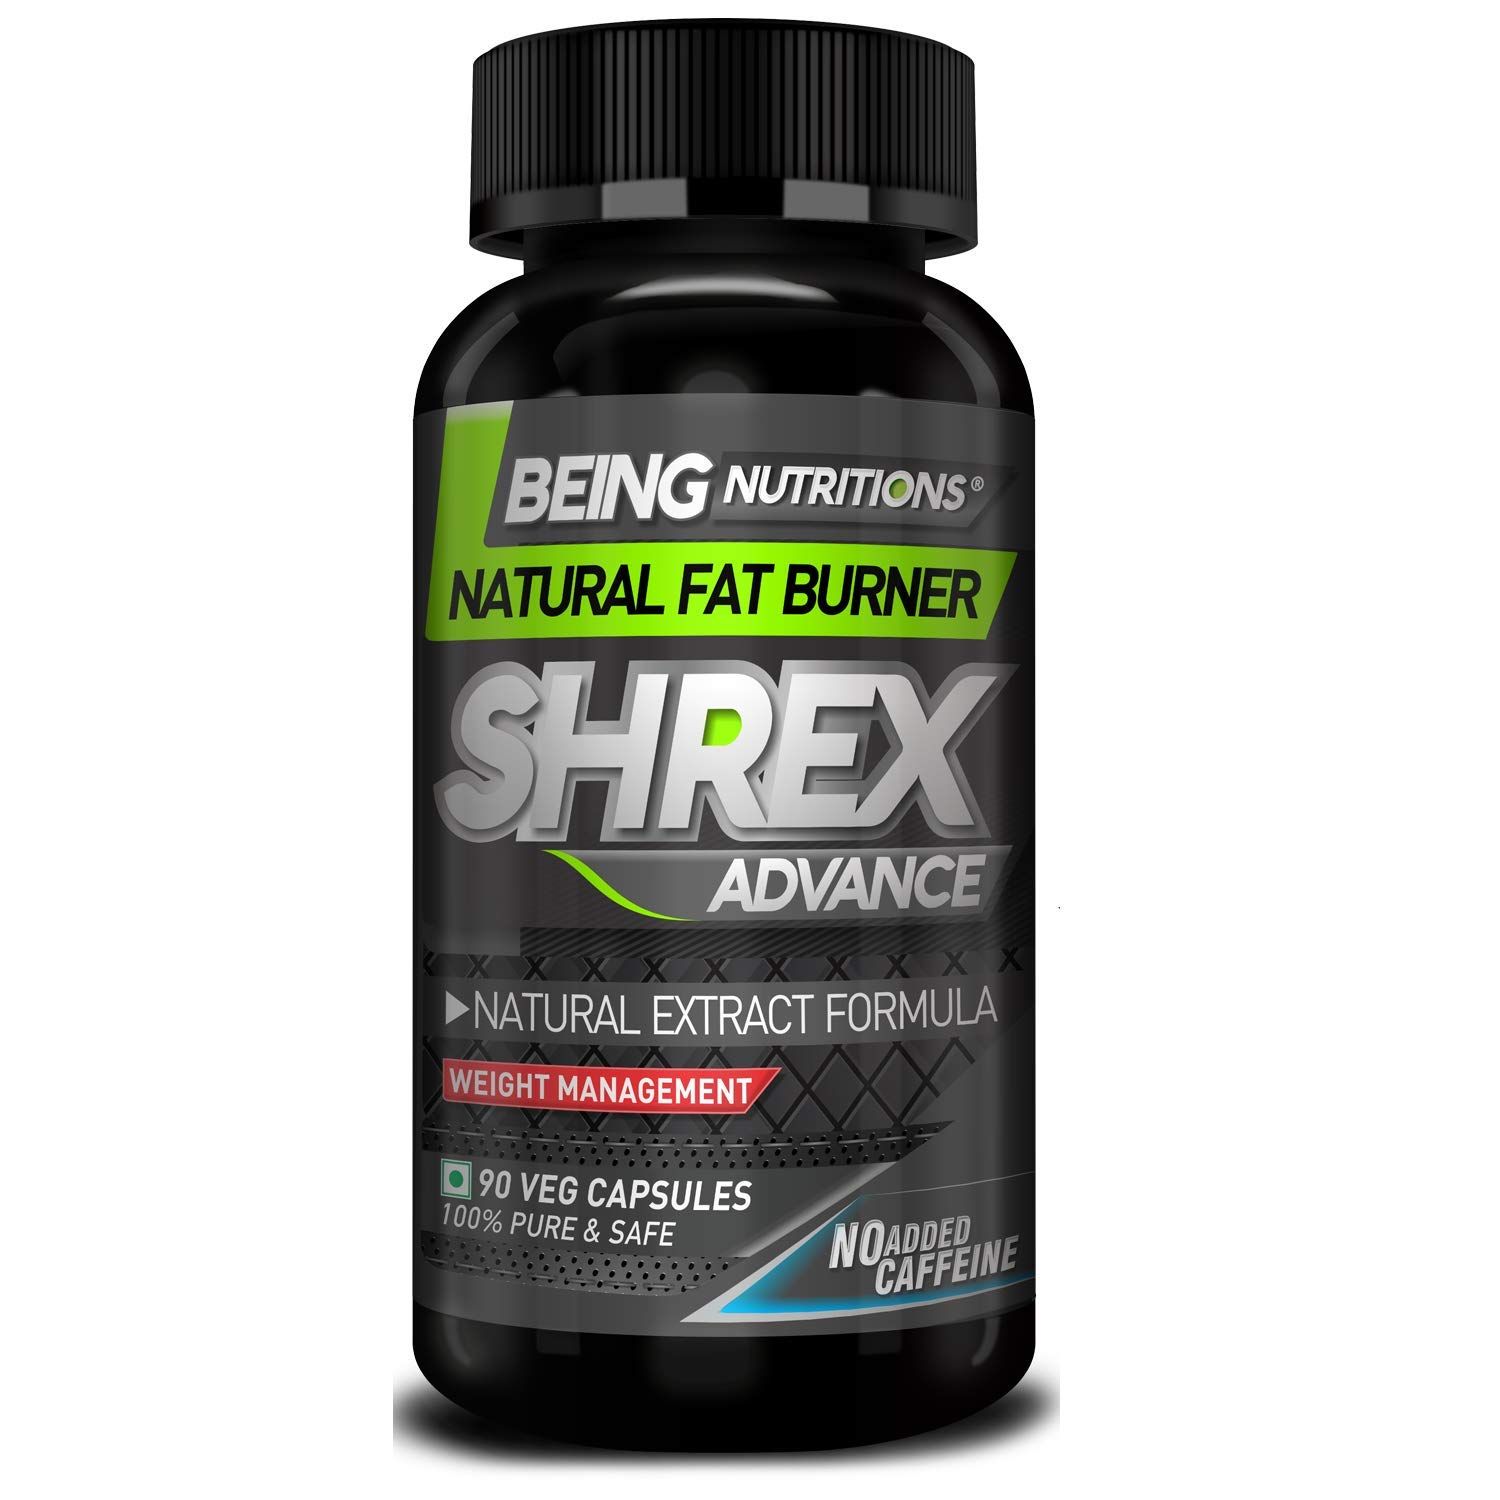 Being Nutritions Shrex Advance Image